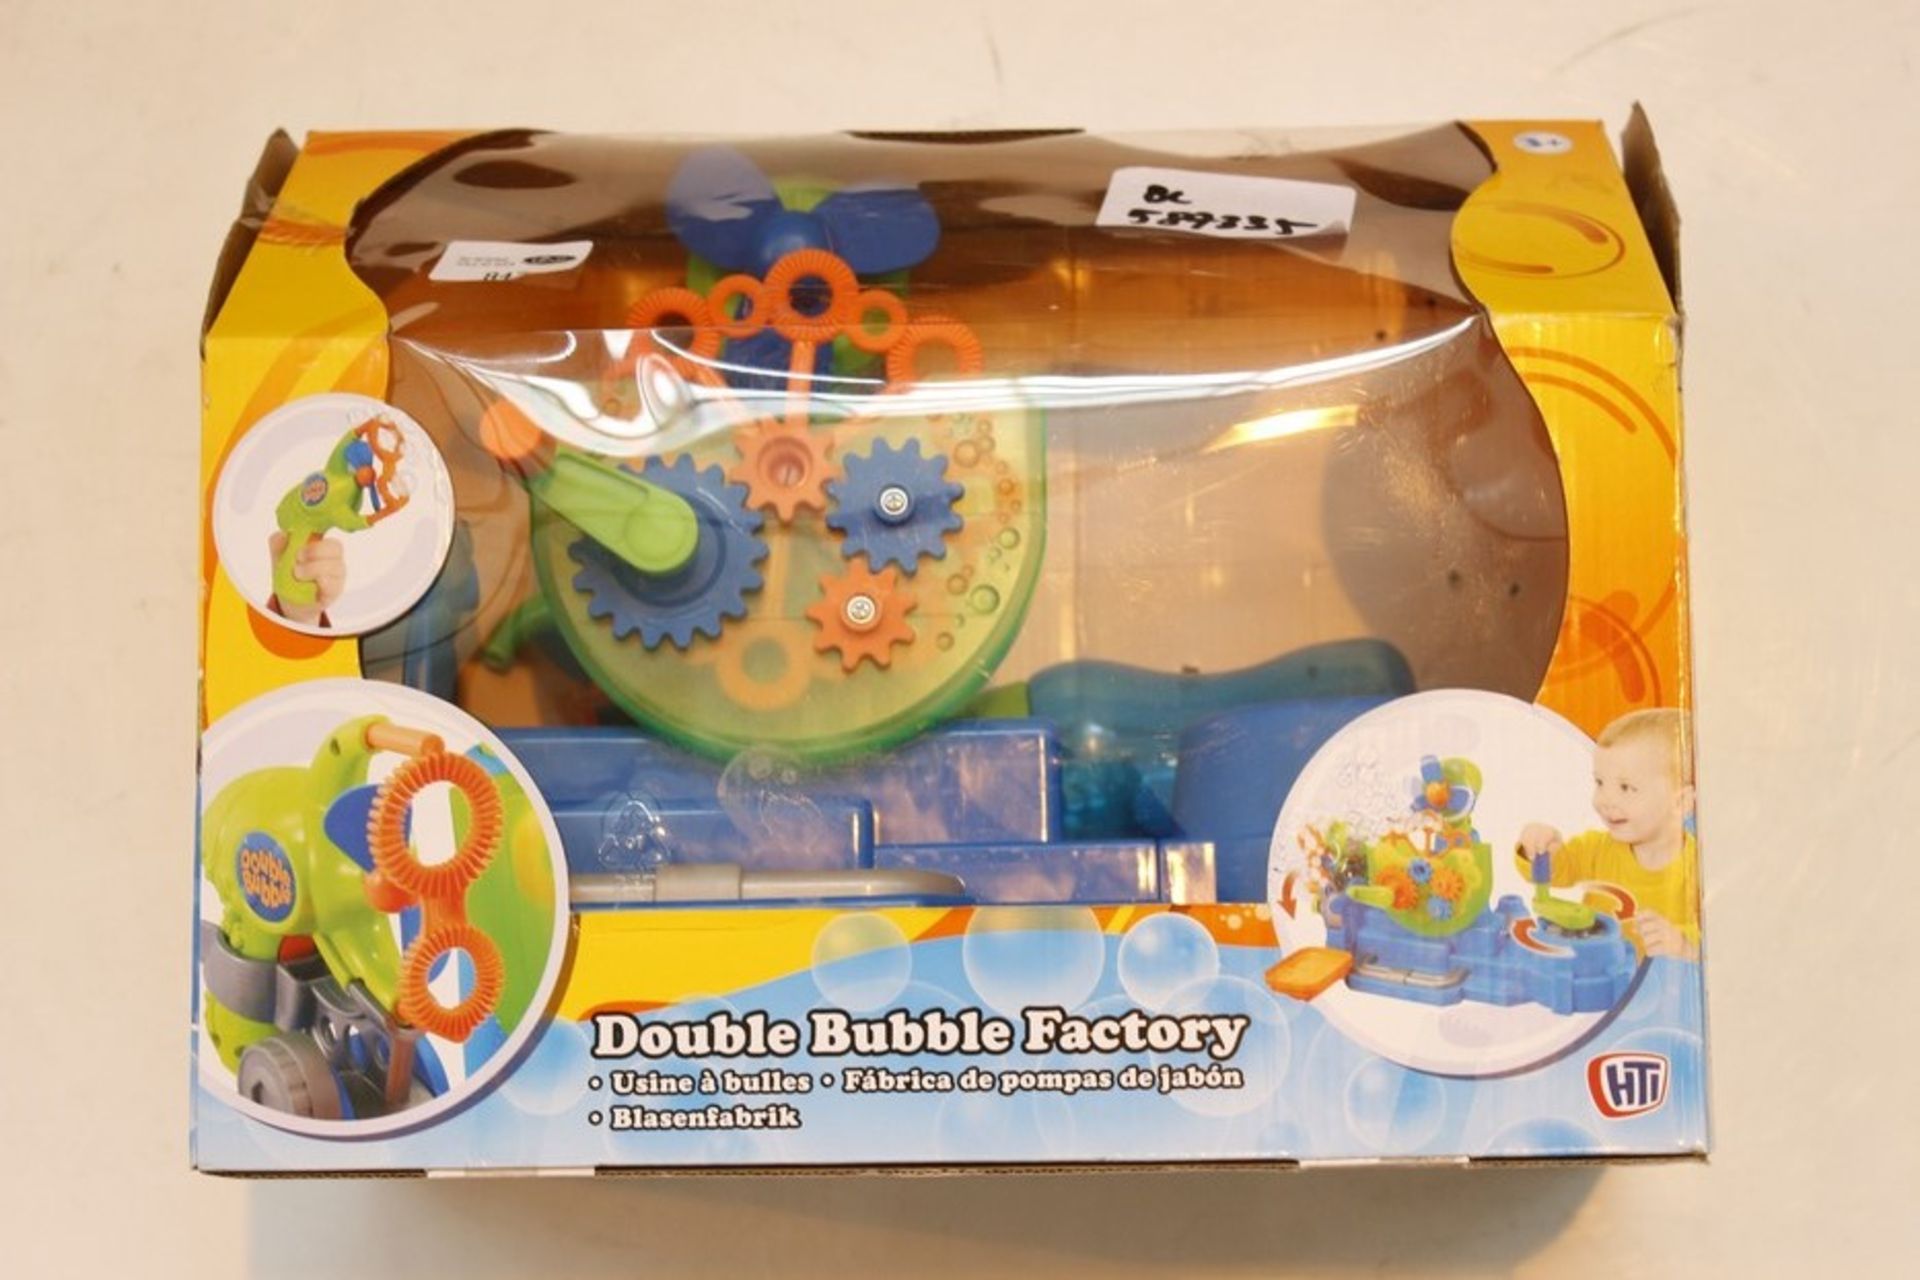 2 x BOXED DOUBLE BUBBLE DOUBLE BUBBLE FACTORY (587335)  *PLEASE NOTE THAT THE BID PRICE IS